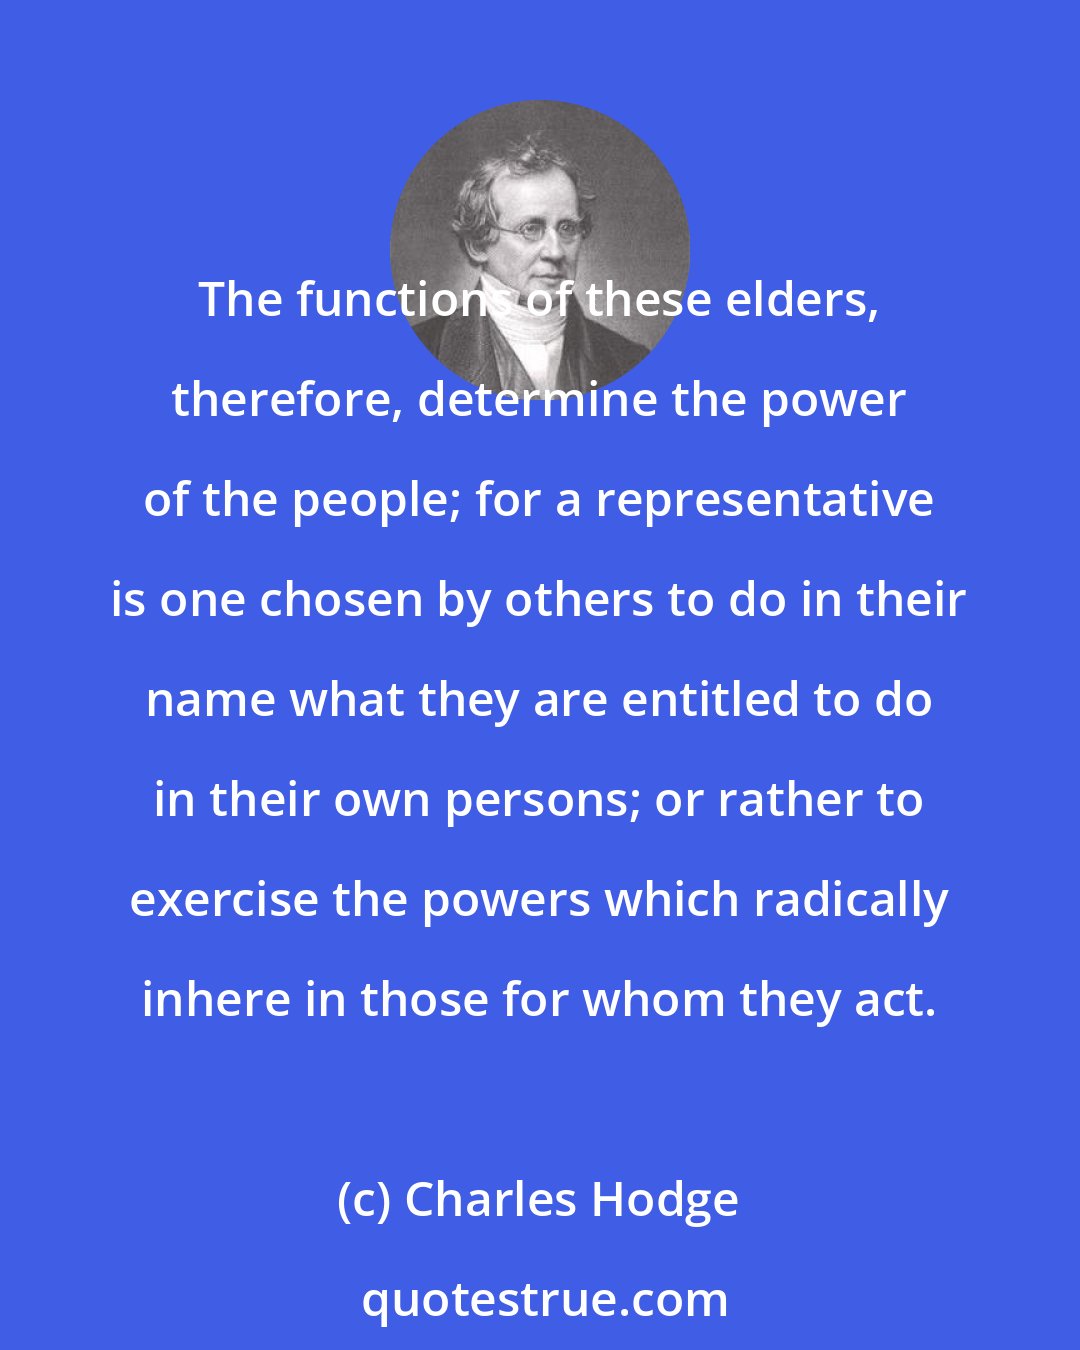 Charles Hodge: The functions of these elders, therefore, determine the power of the people; for a representative is one chosen by others to do in their name what they are entitled to do in their own persons; or rather to exercise the powers which radically inhere in those for whom they act.